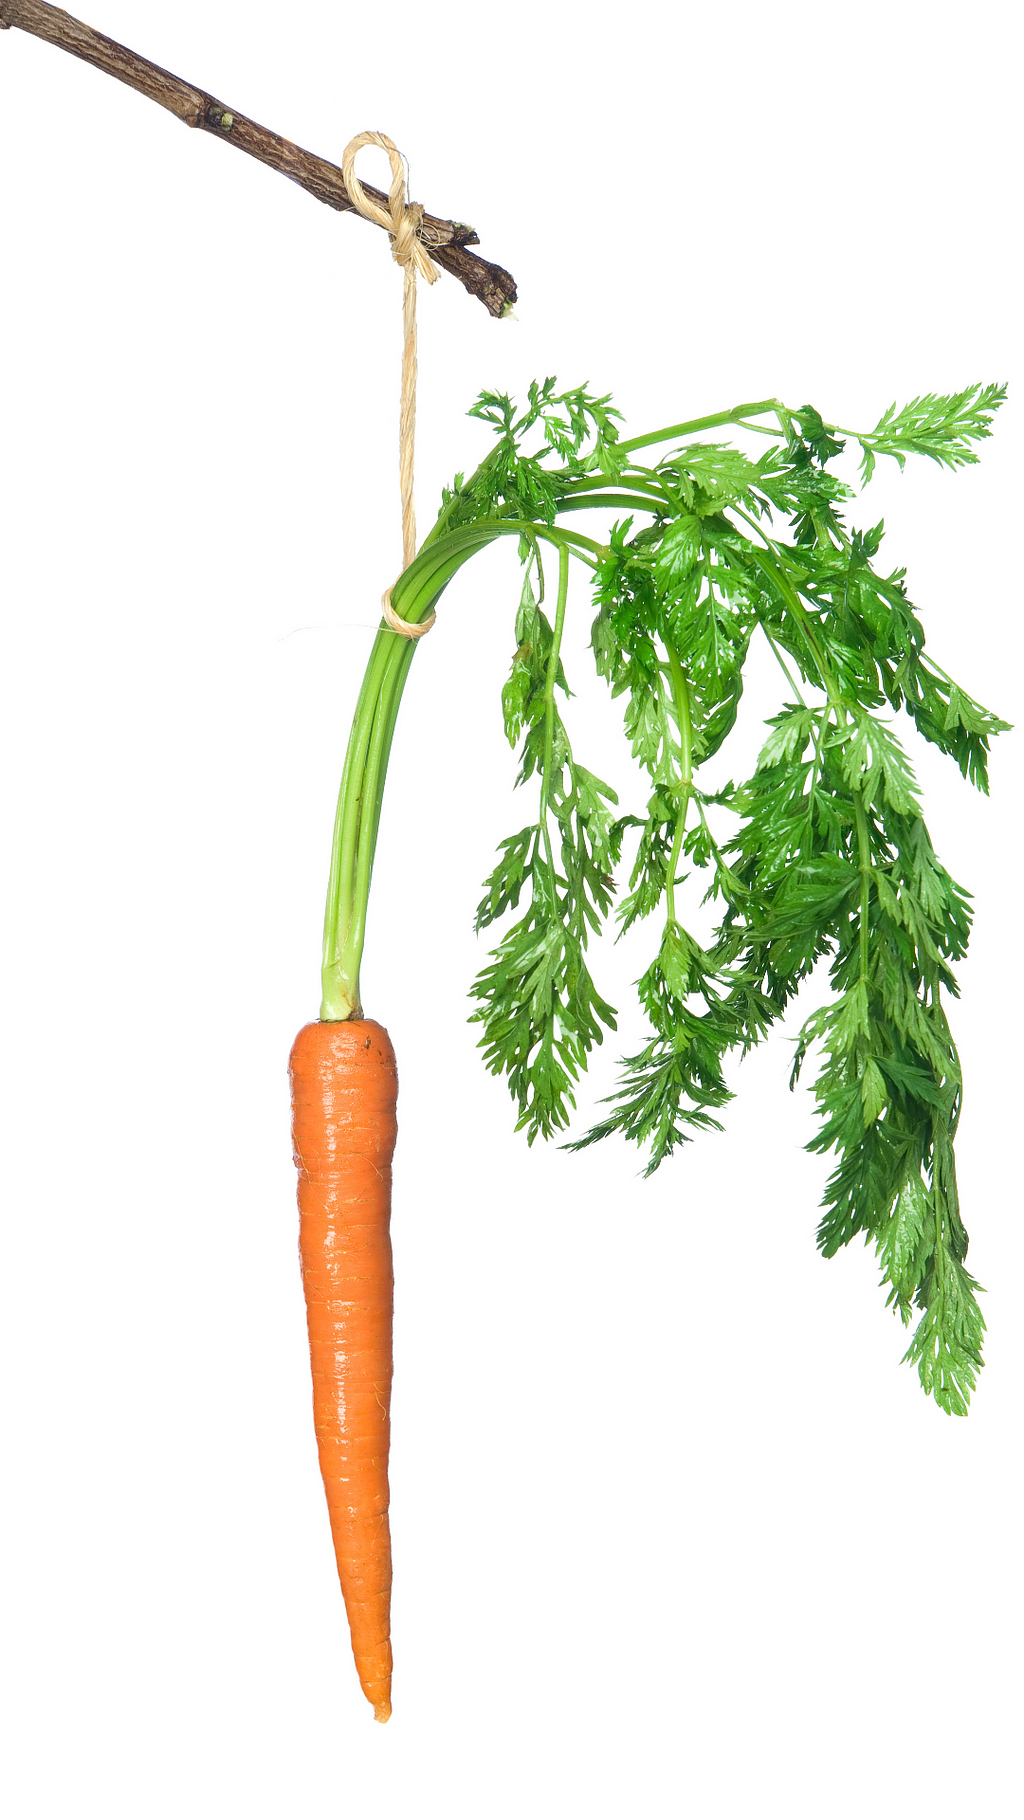 A carrot dangling by from a stick by a thread